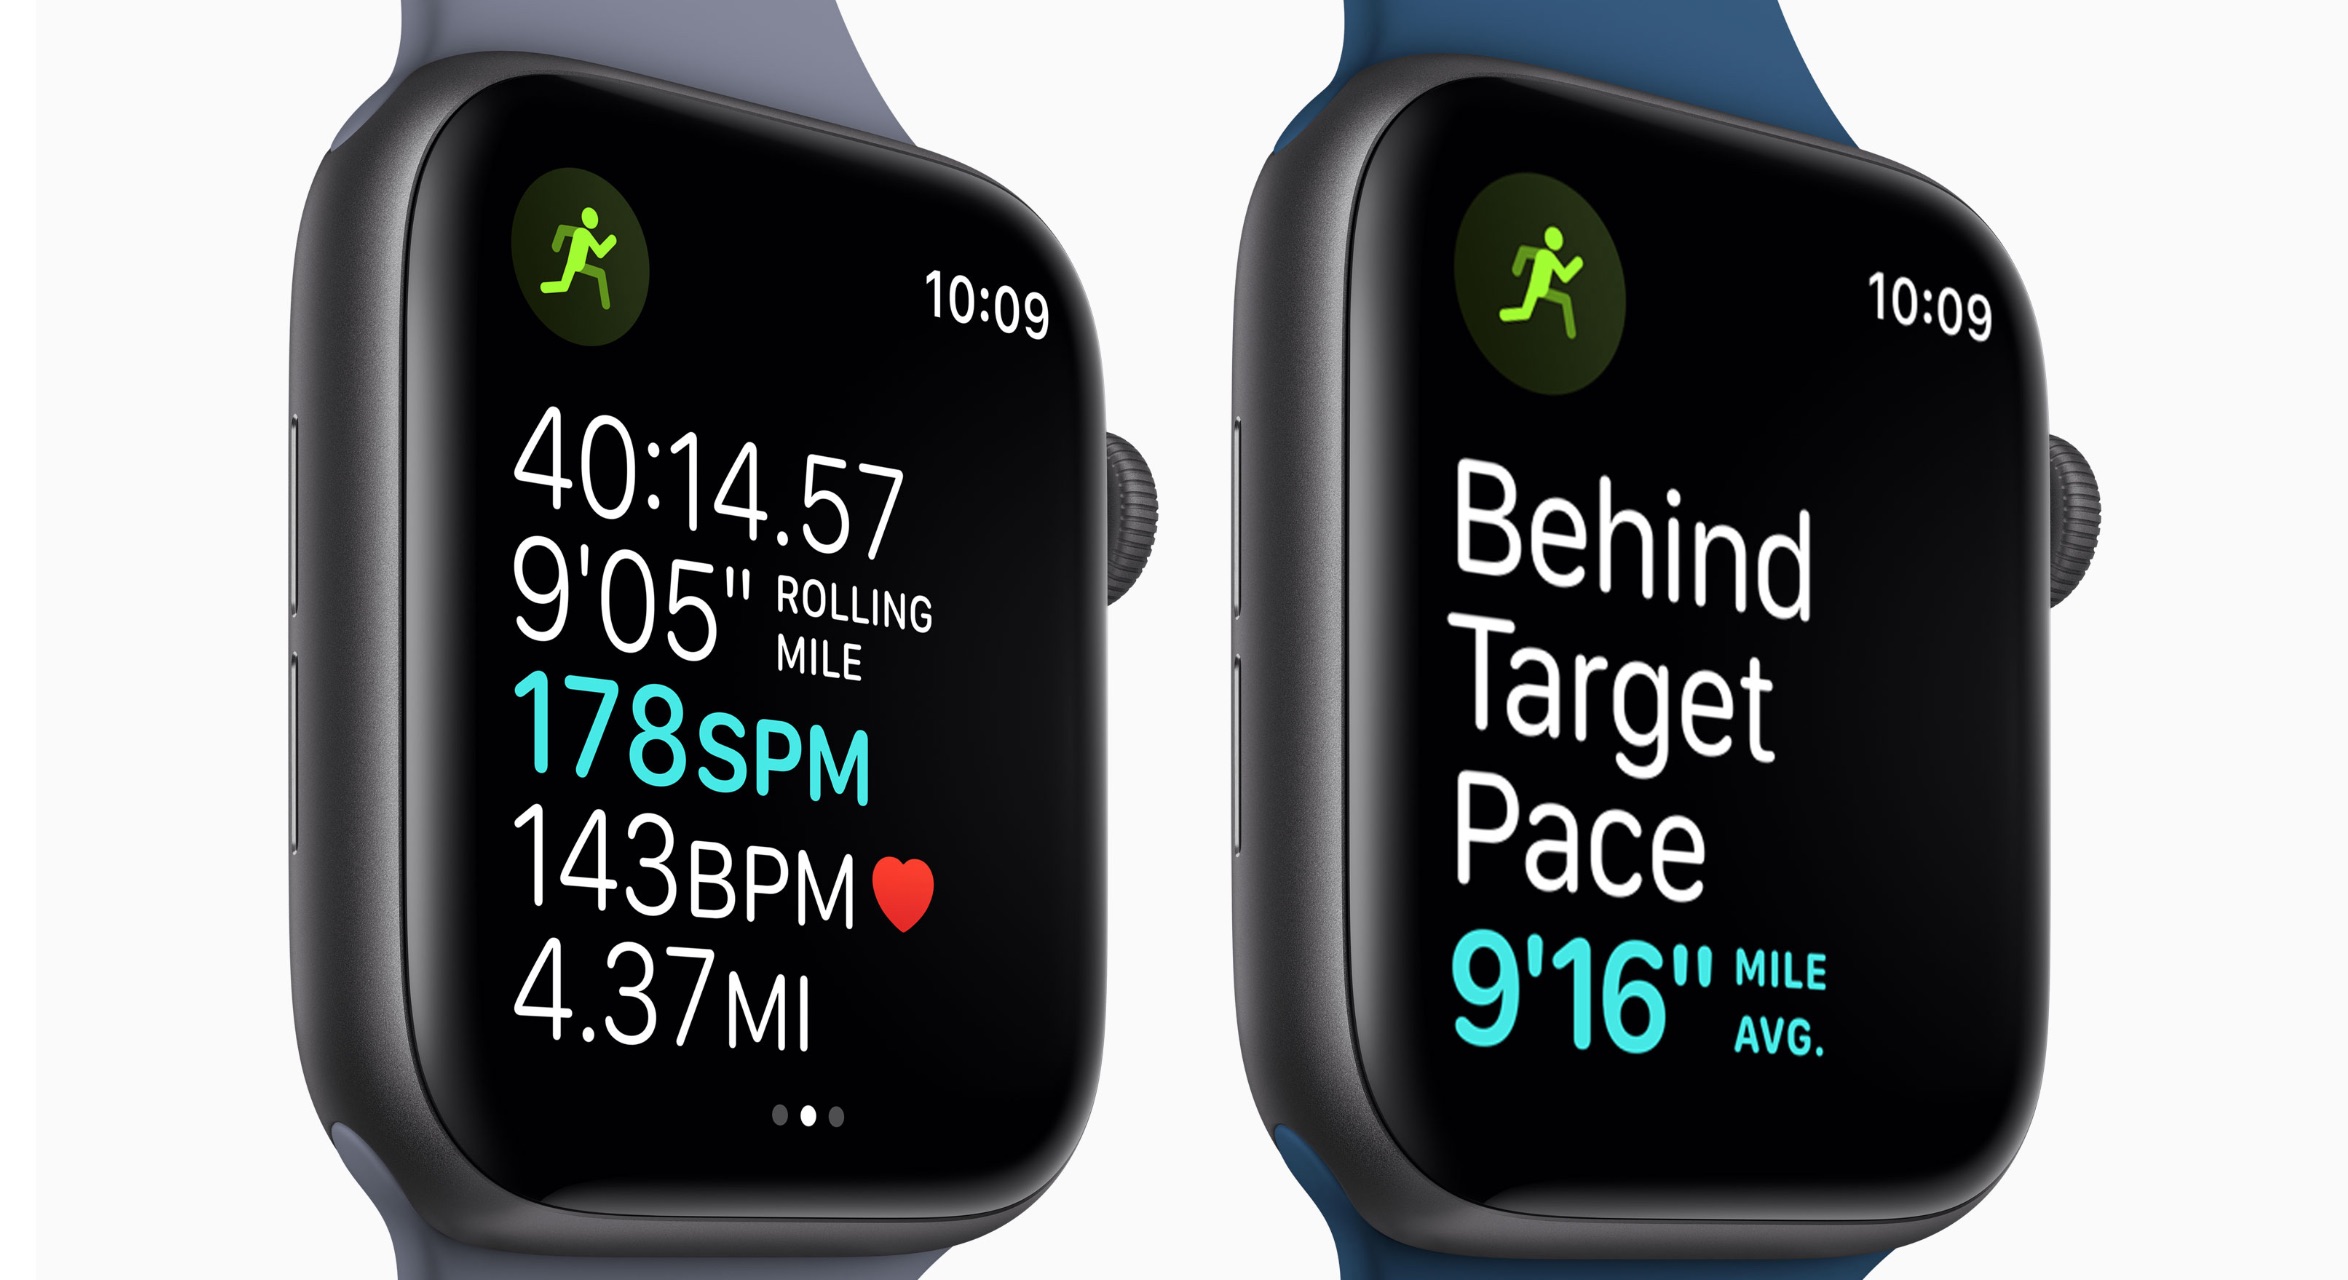 best way to track workout on apple watch